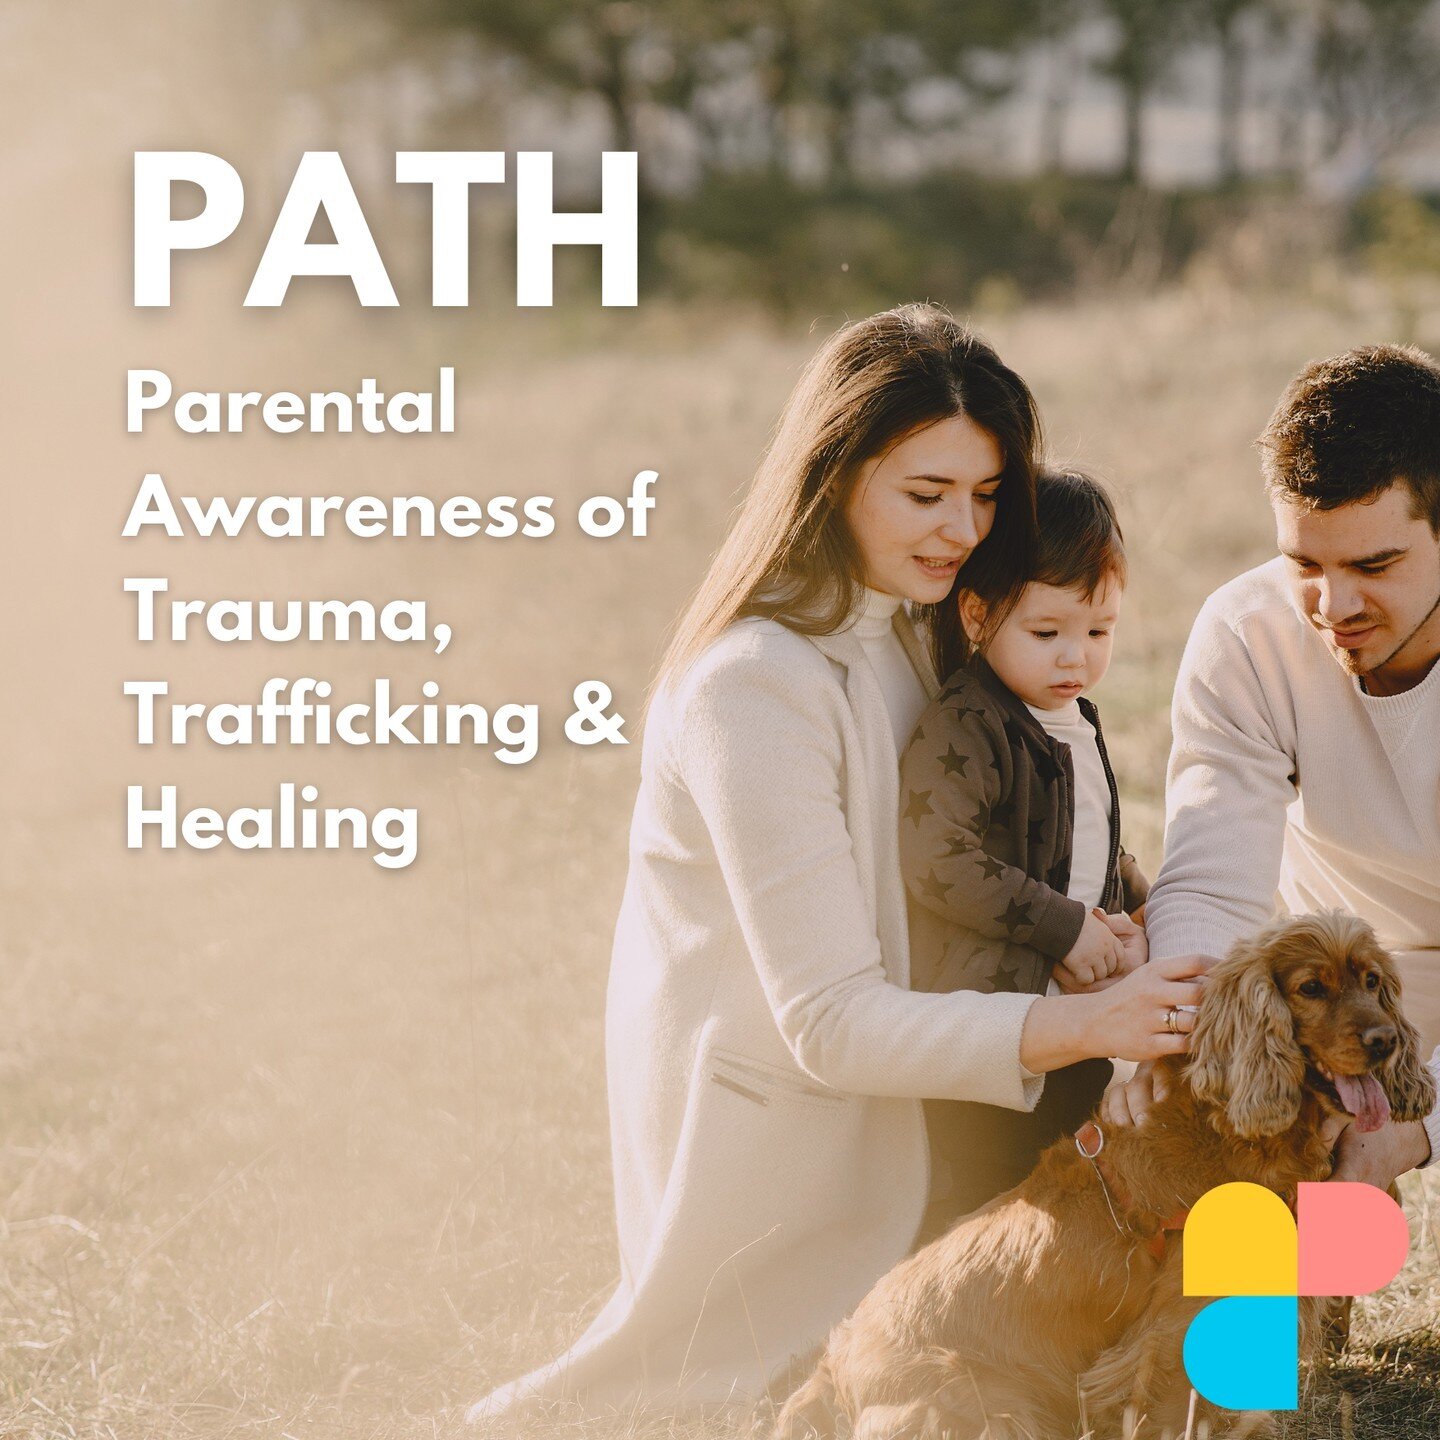 The Parent Resource ✨PATH✨

&ldquo;For 11 years, I have spoken to countless parents who learned their child had been sex trafficked. New Day is on a mission to help families heal from this tragedy. When a child is trafficked, there is trauma that imp